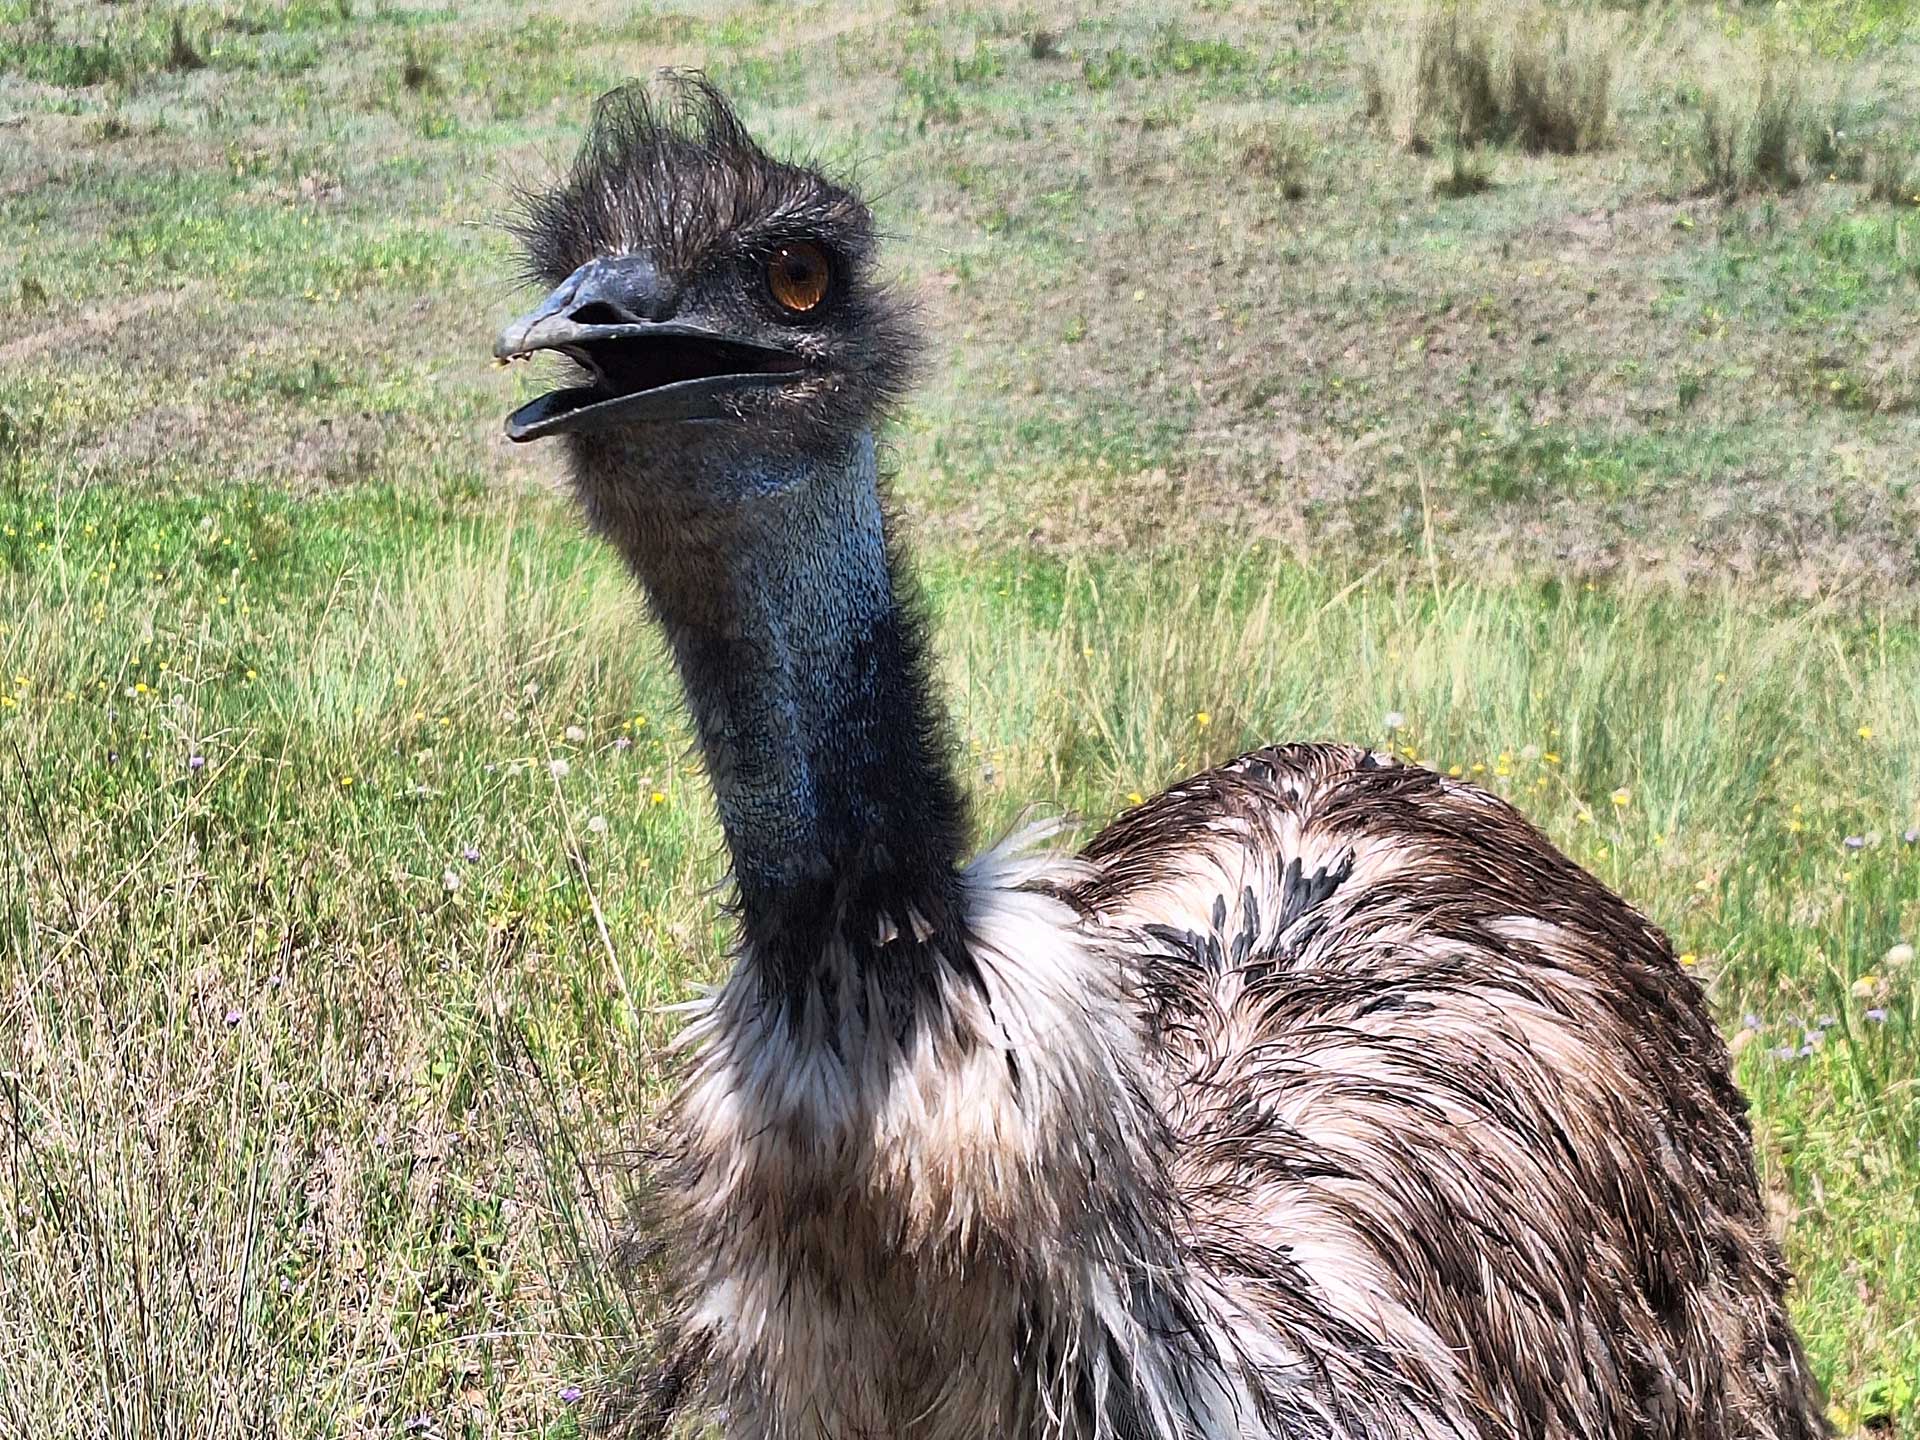 Jeffrey the local emu came to say good bye.